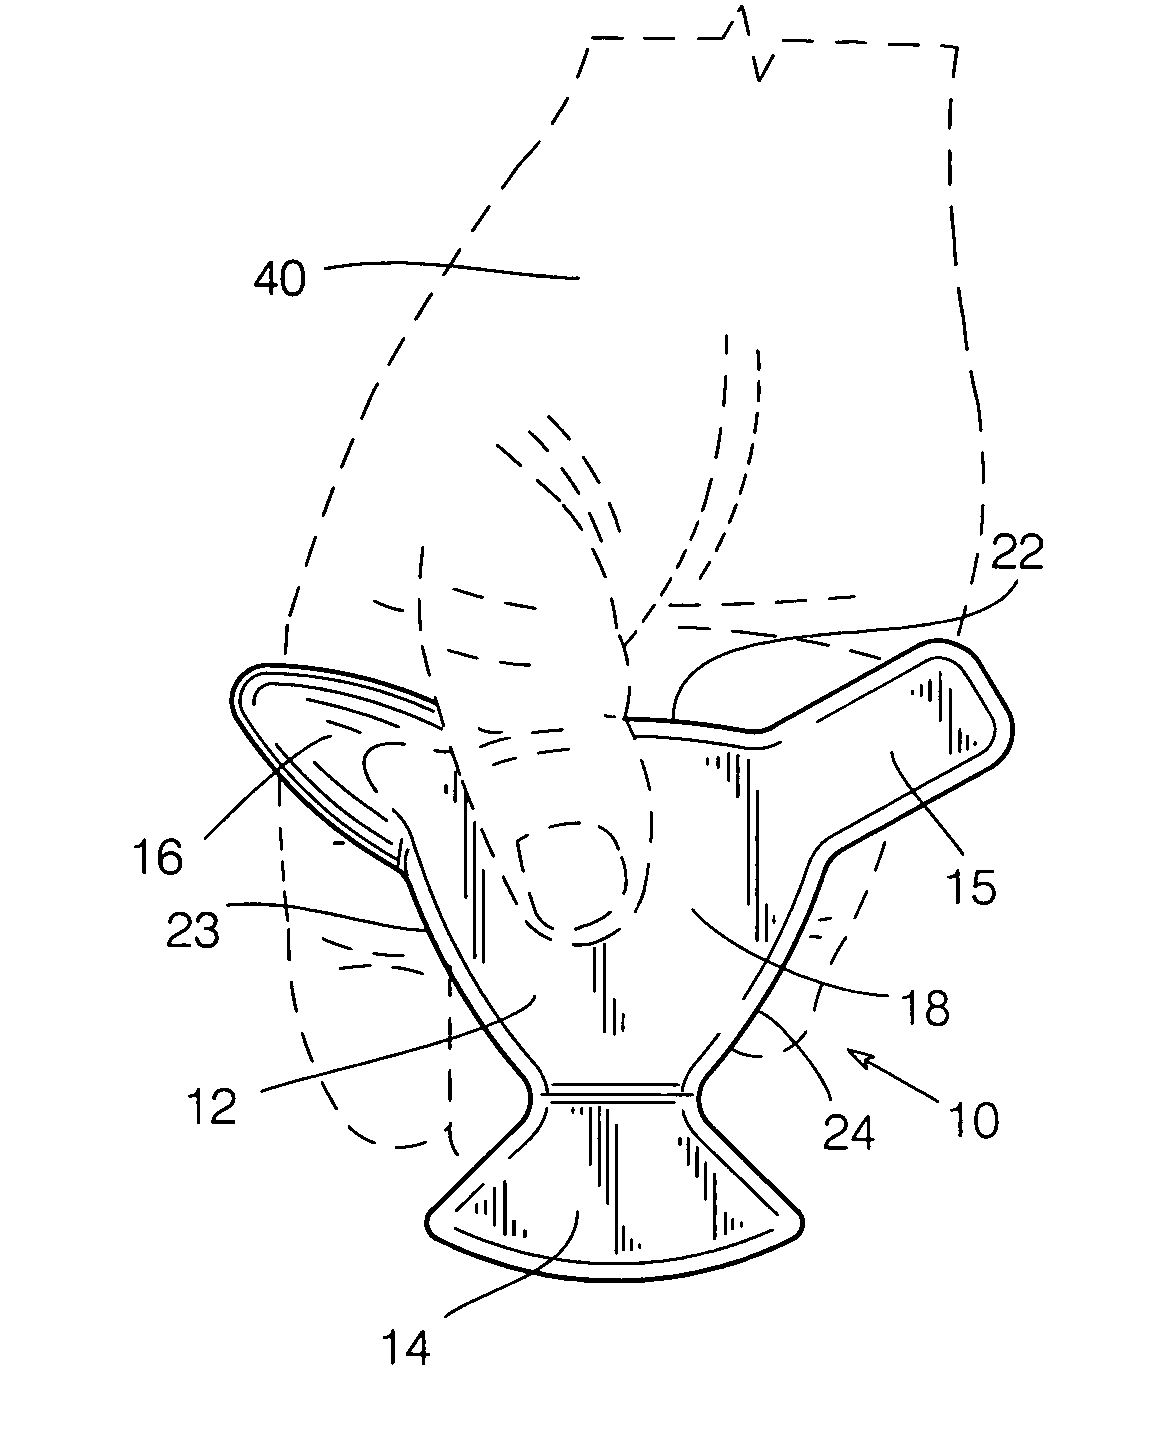 Generally triangular-shaped massage tool with three different contact elements